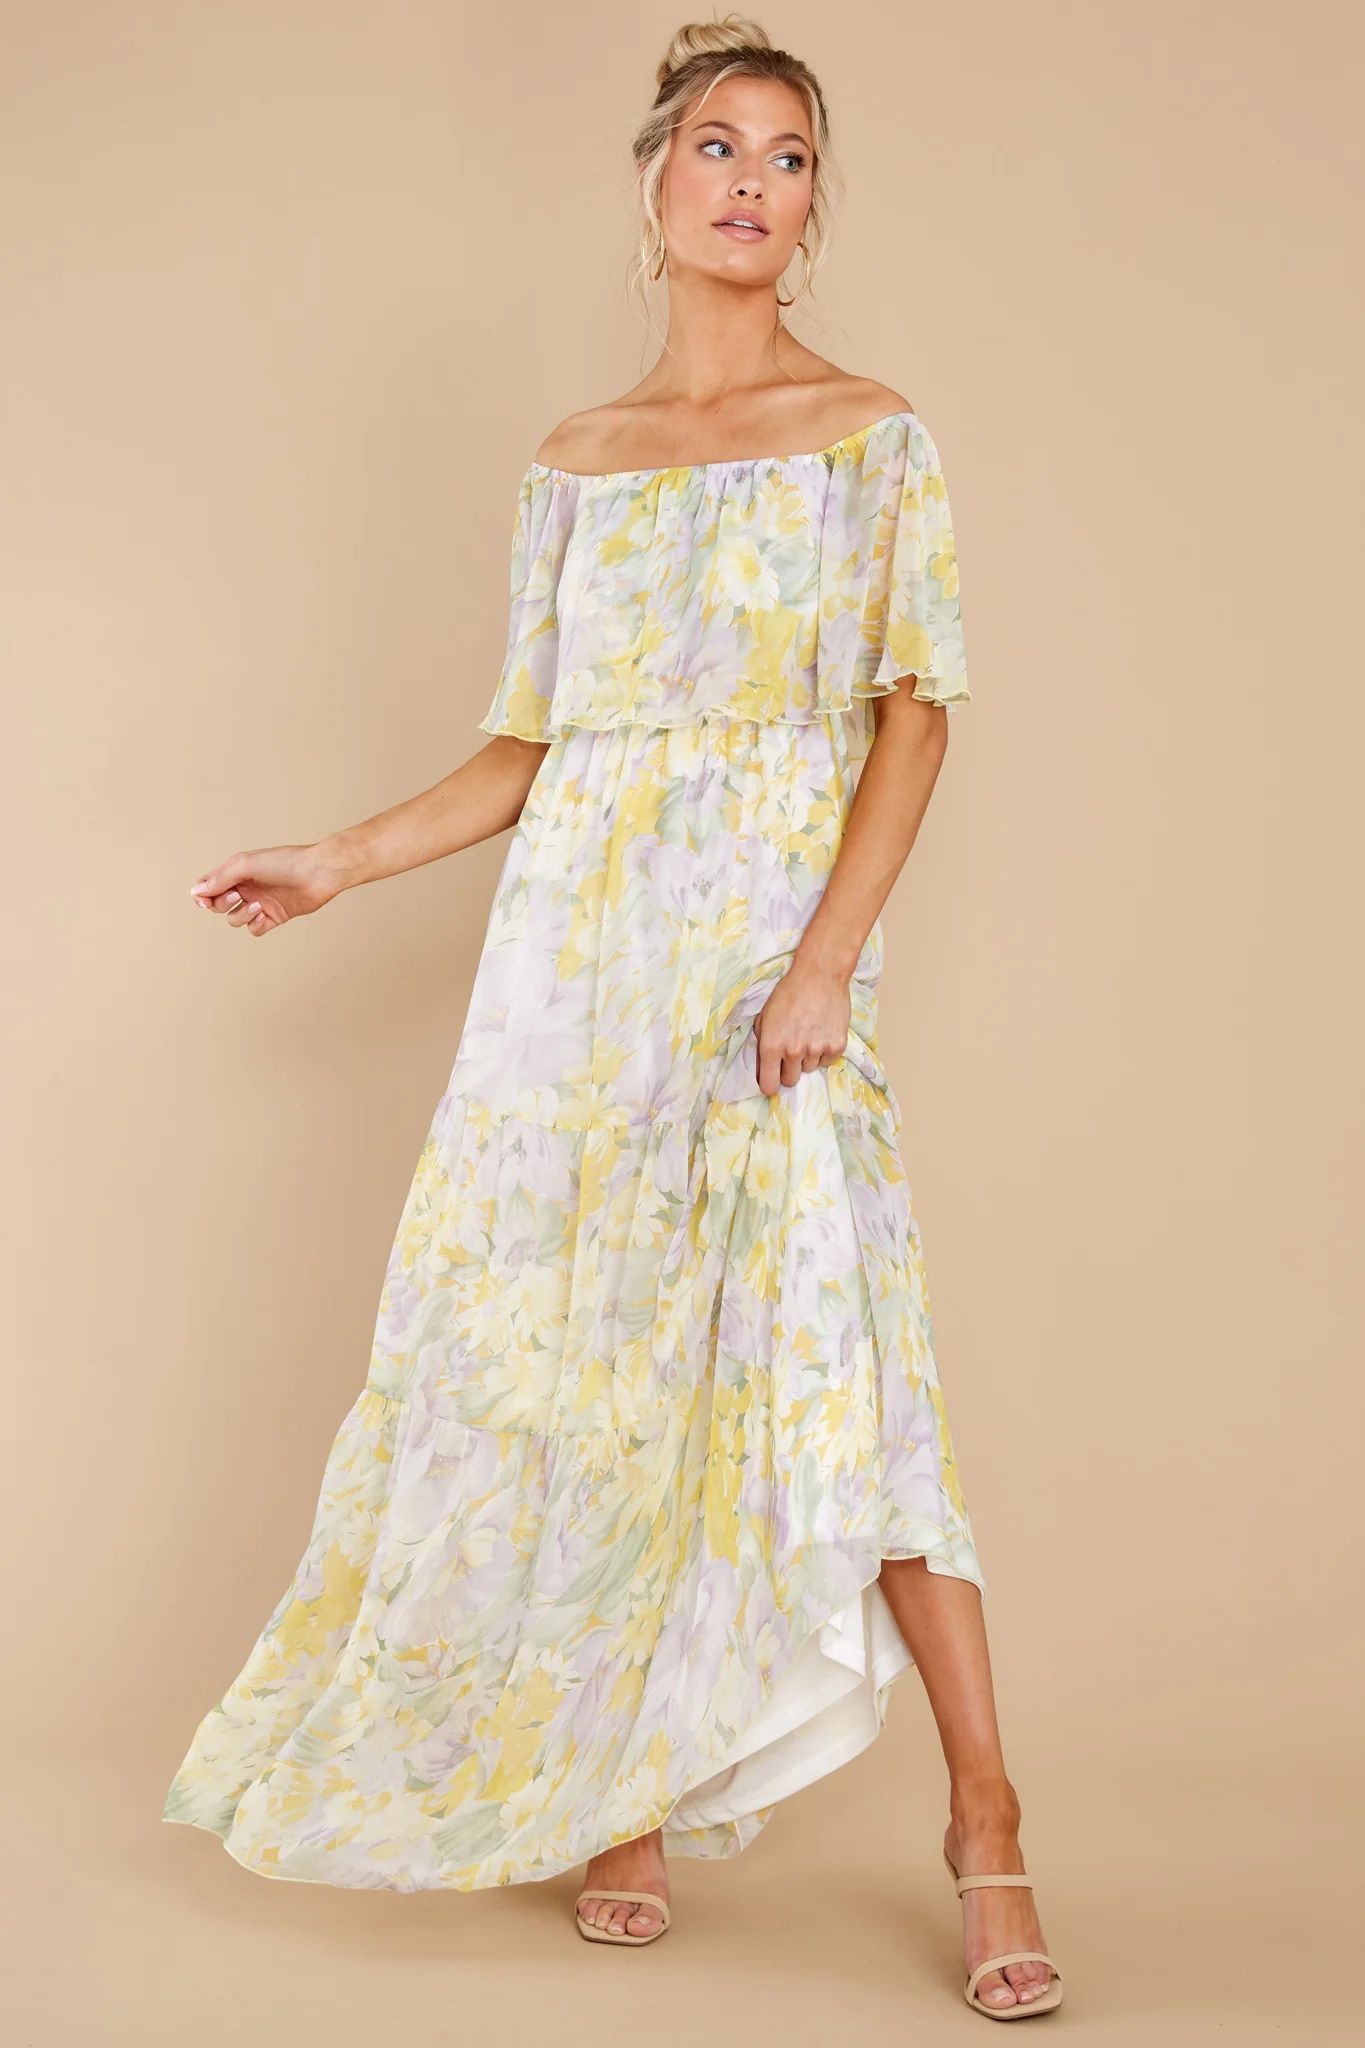 Washed Memories White And Yellow Floral Print Maxi Dress | Red Dress 